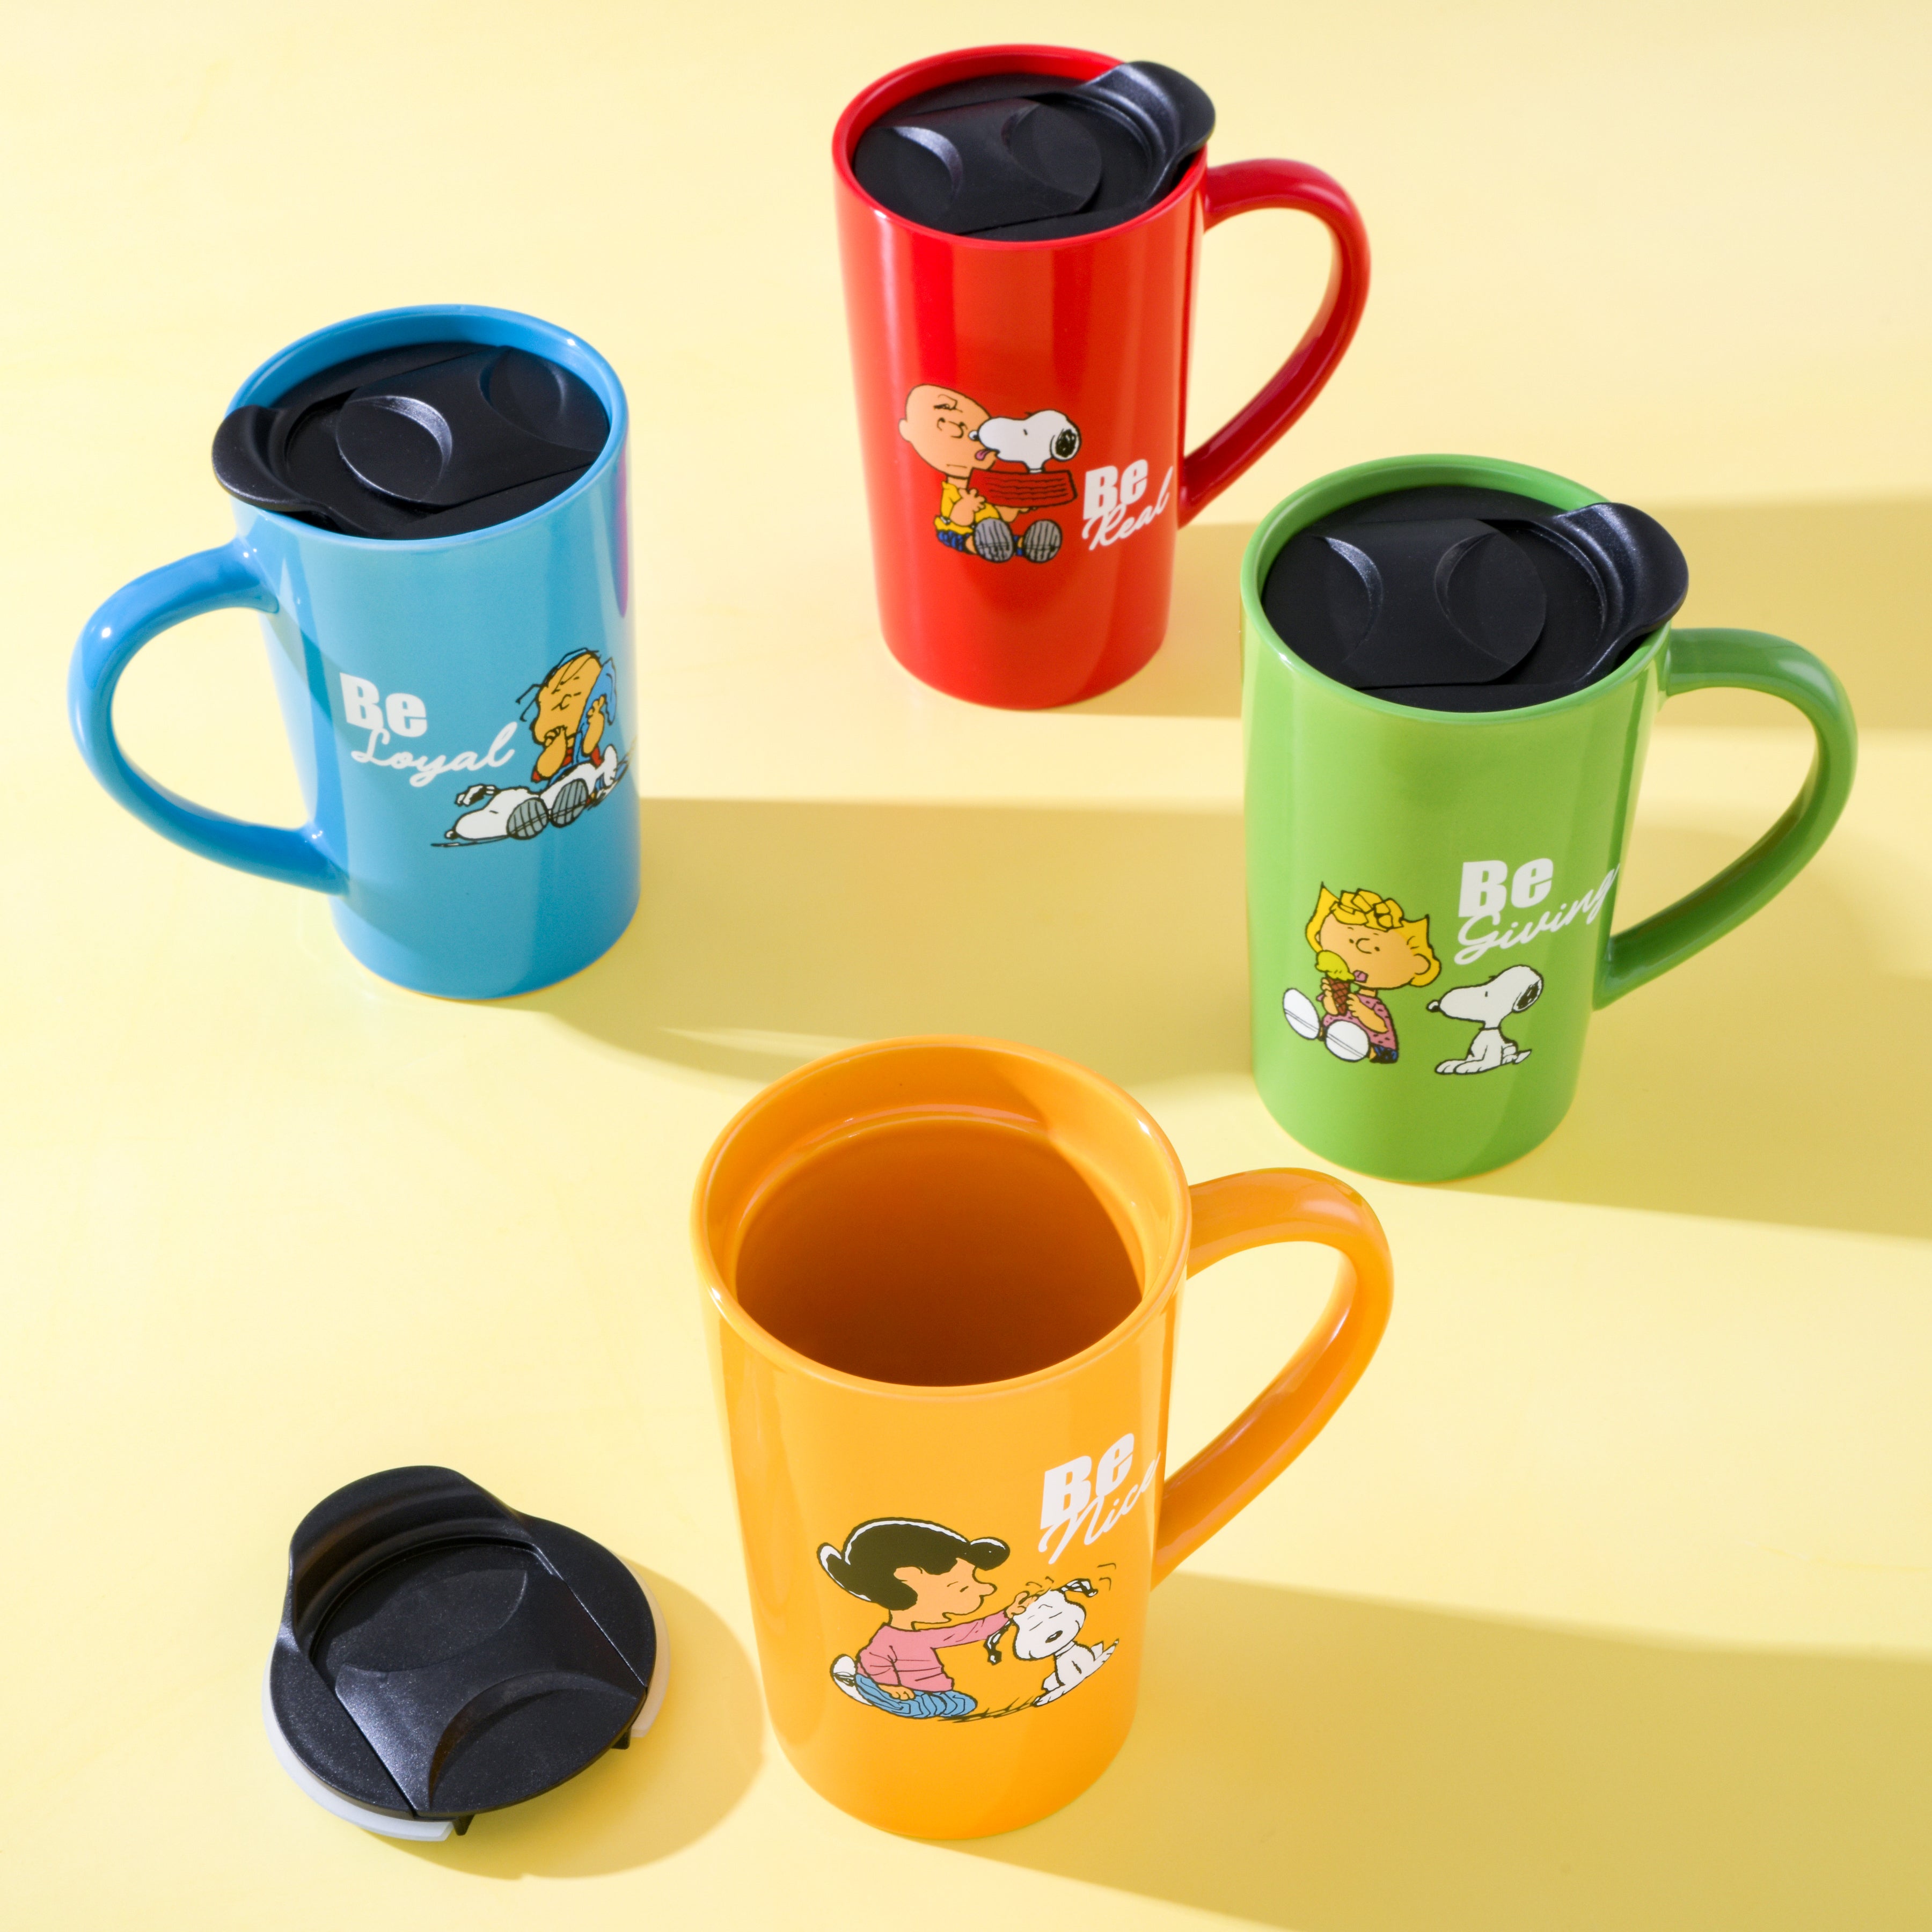 Cool Gear 3-Pack Eco 2 Go Coffee Mug with Protective Removable Band